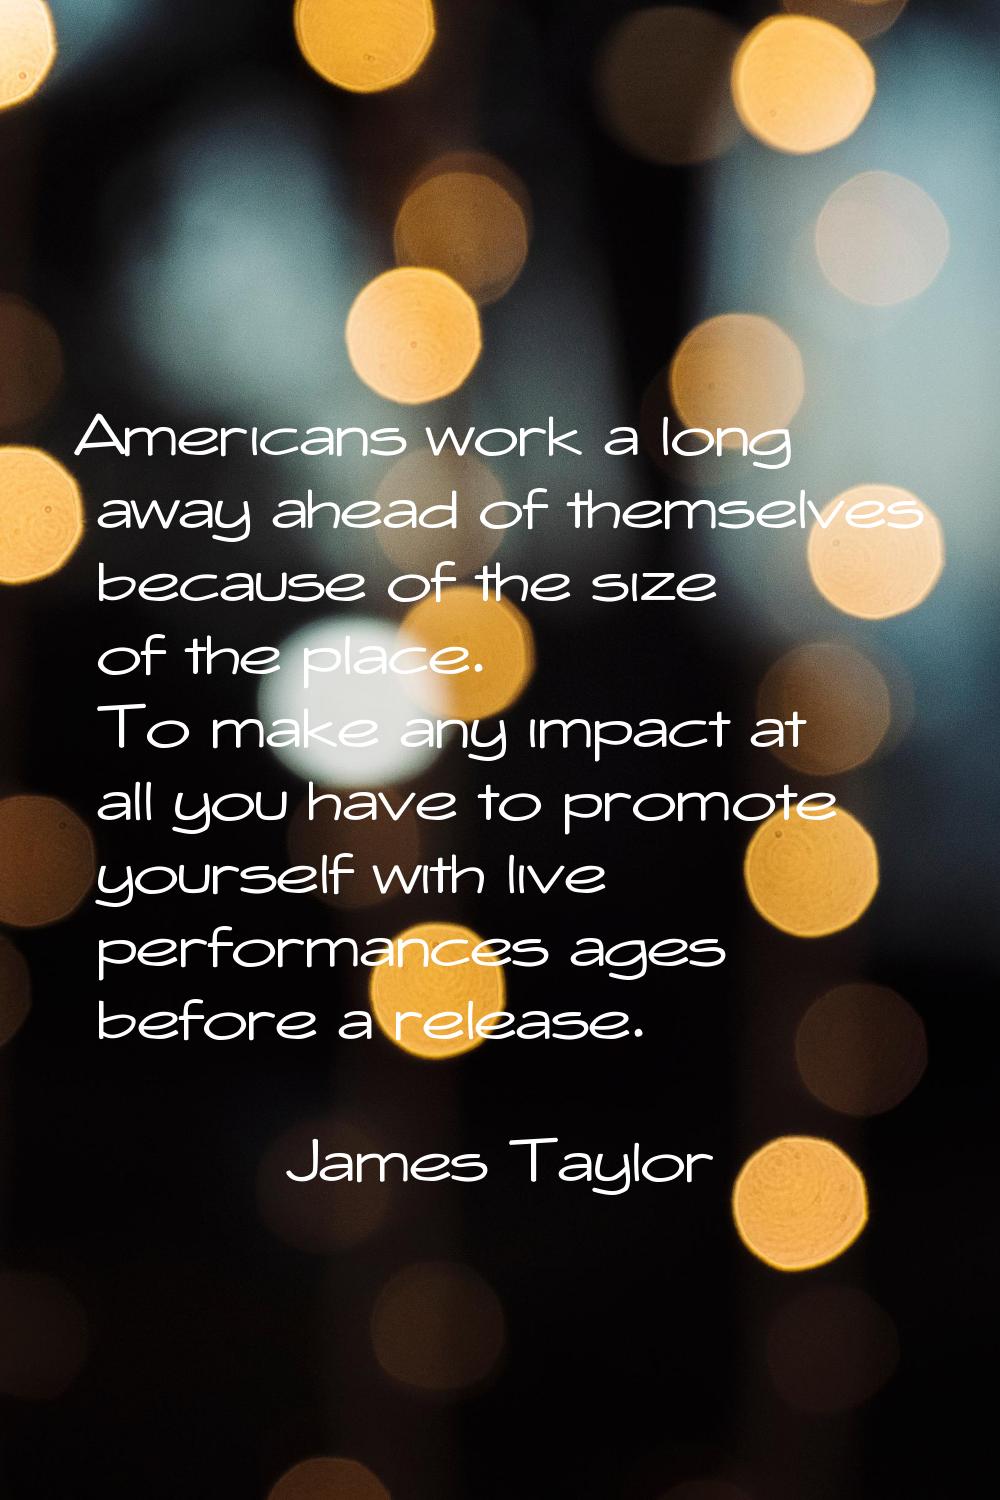 Americans work a long away ahead of themselves because of the size of the place. To make any impact